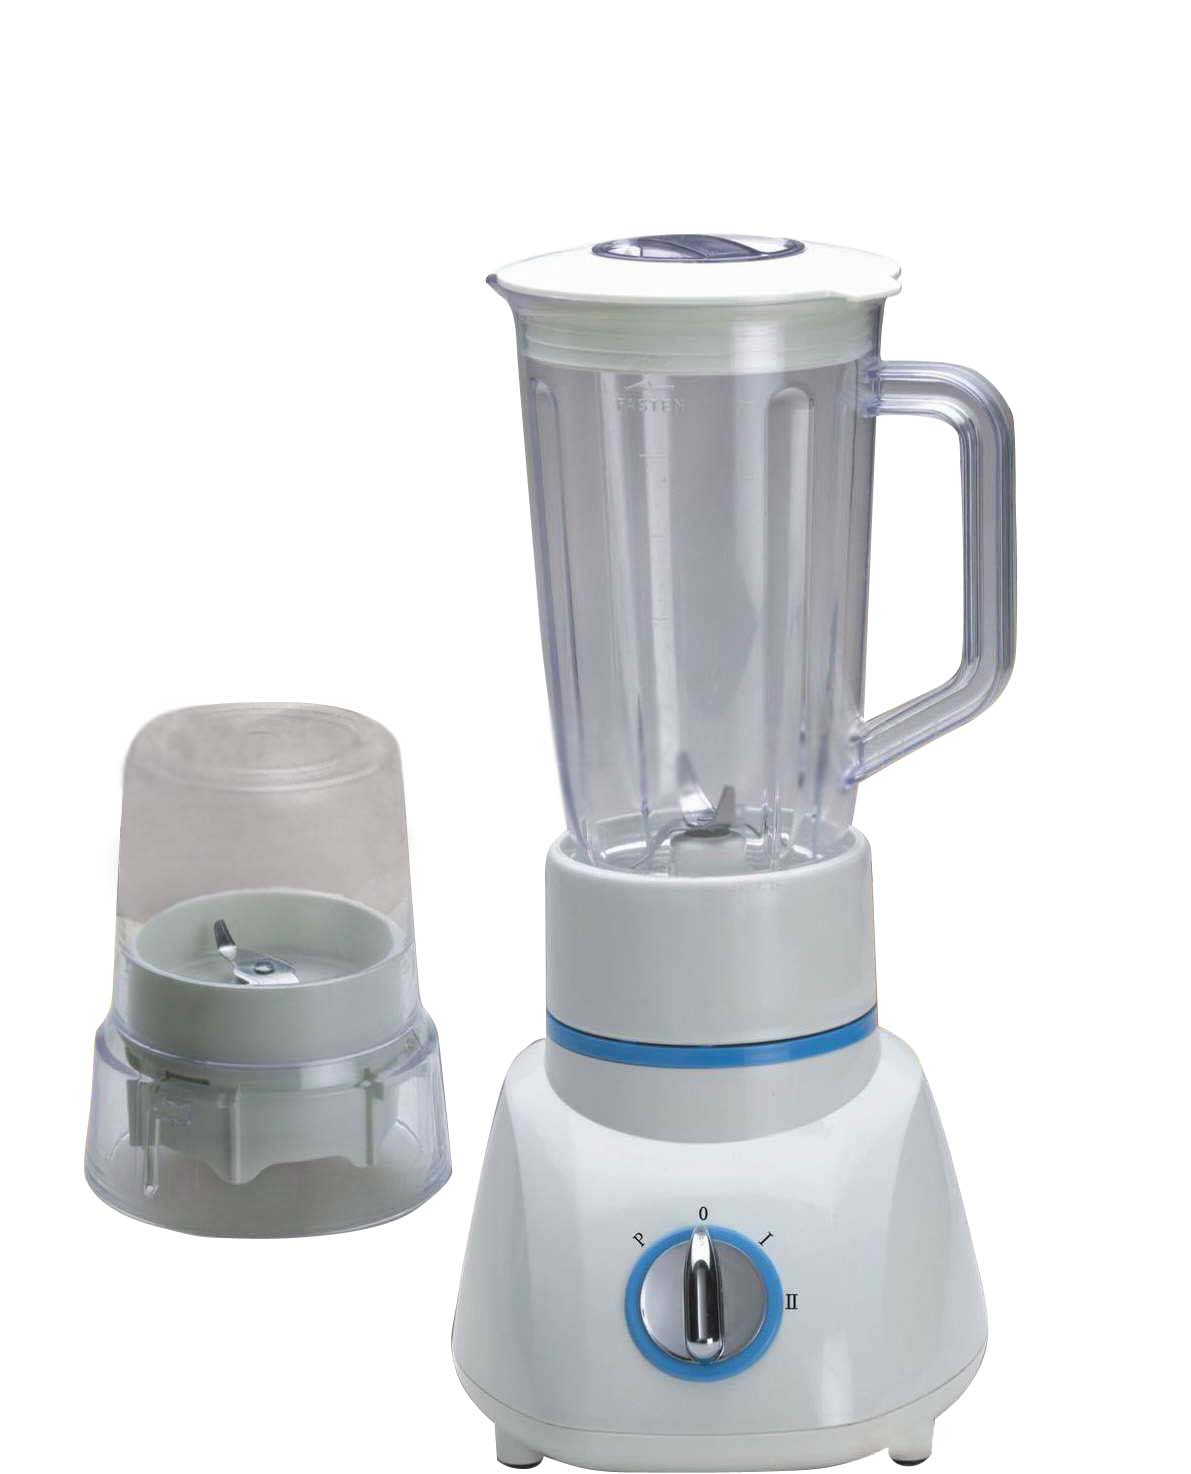 High quality household electric blender,300W,2 speed & pulse,1000ml